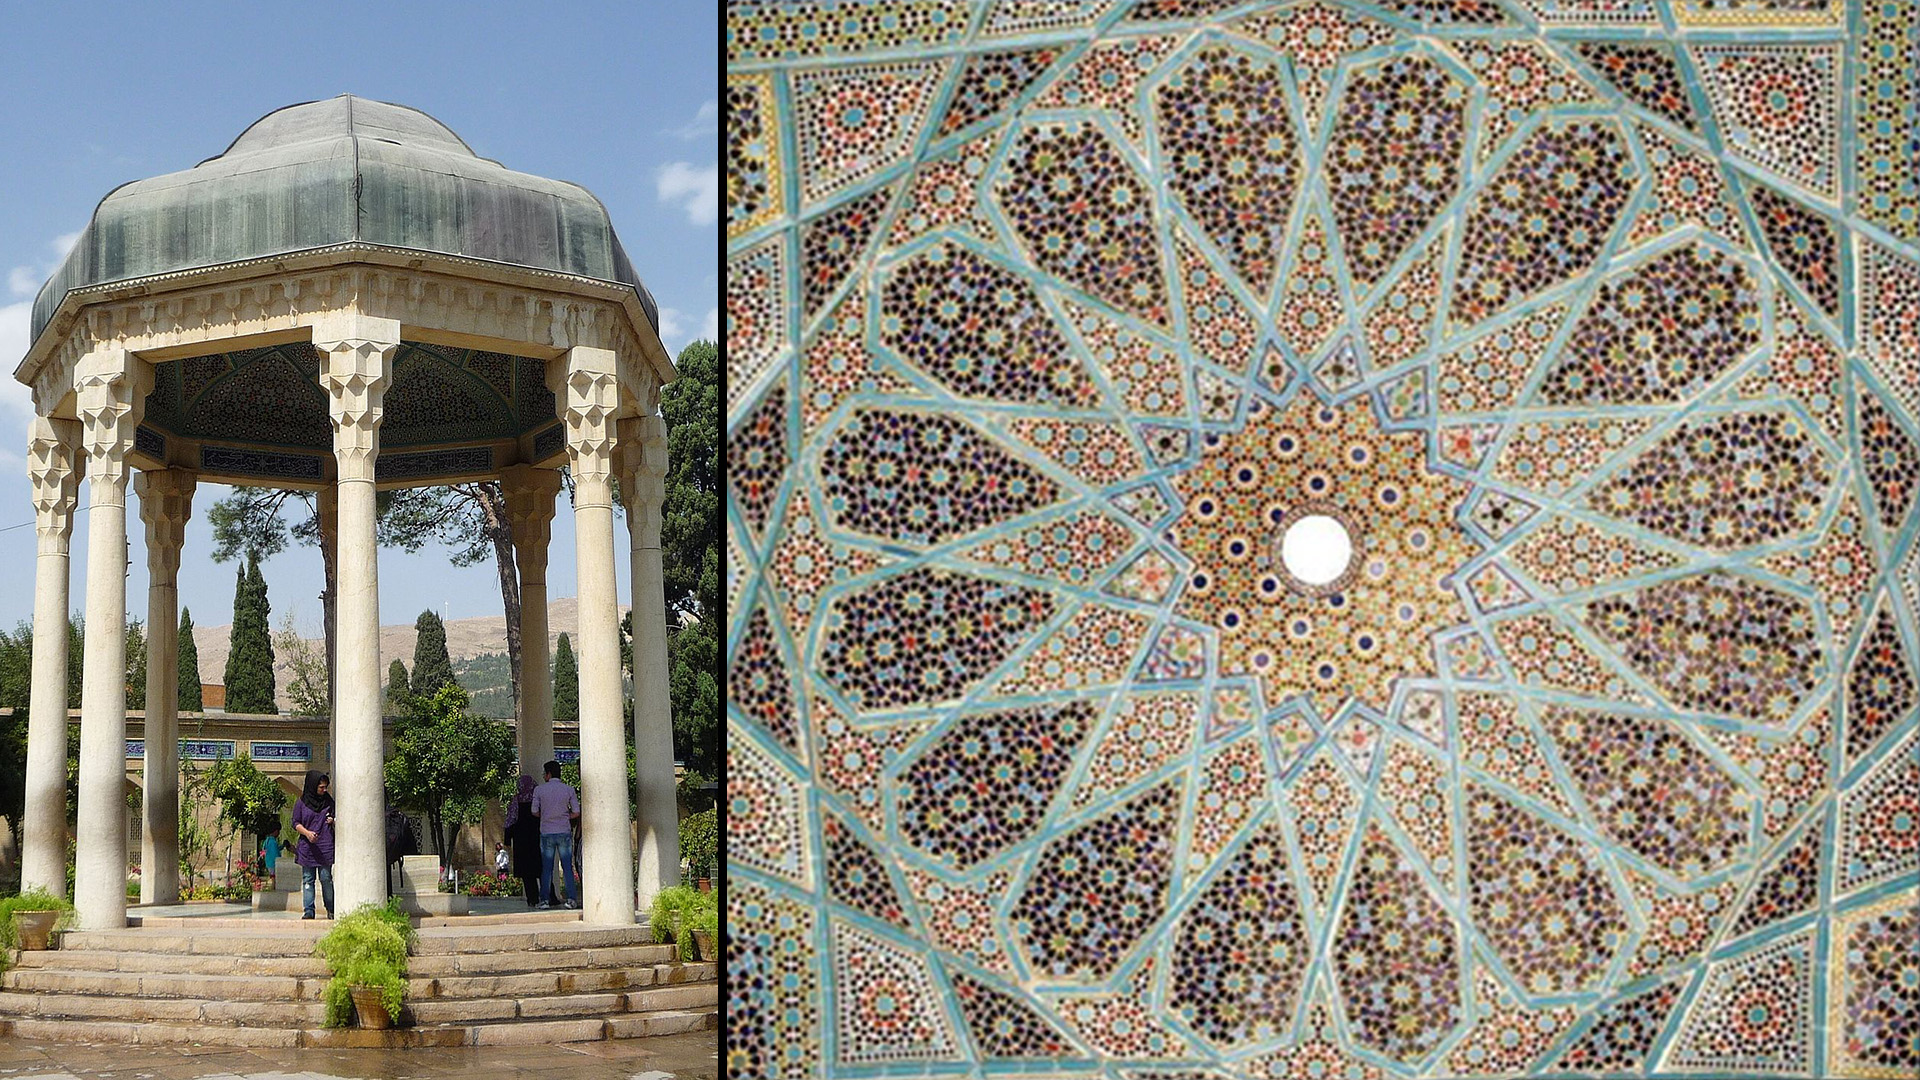 2 images side-by-side: one of the tomb of the poet, Hafiz, the other, an image of the ceiling within that structure